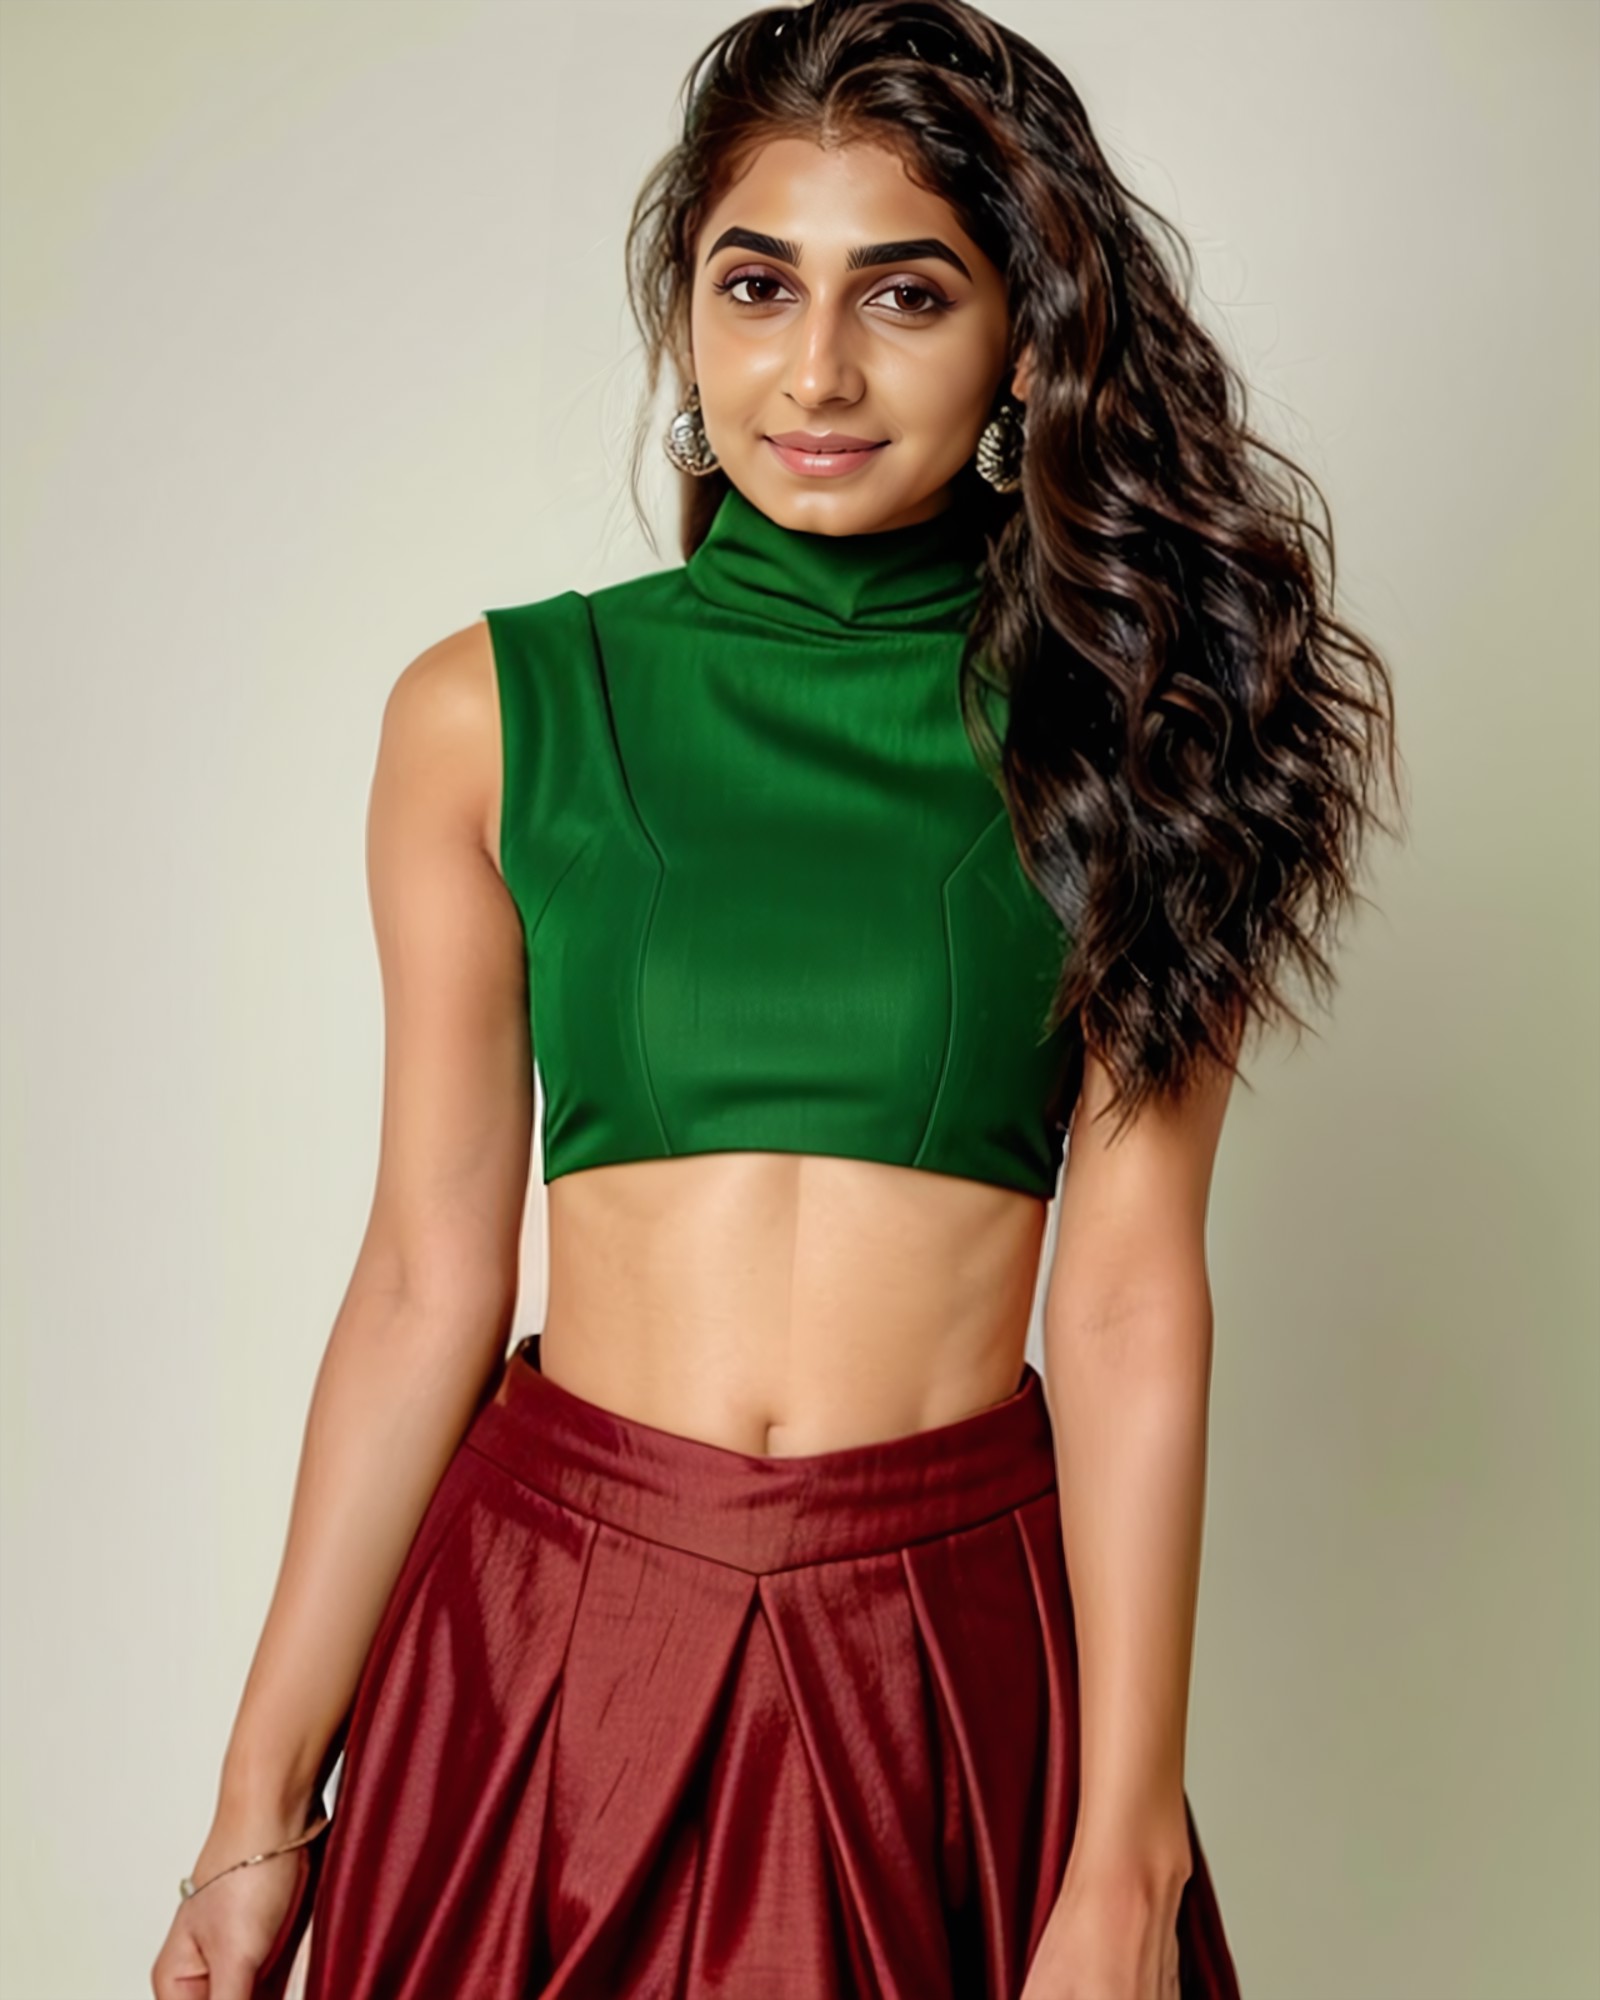 portrait photo of a vdka:0.8 woman, wearing intricate high-neck red and green ghagra choli, solo, smiling, nose piercing, ...